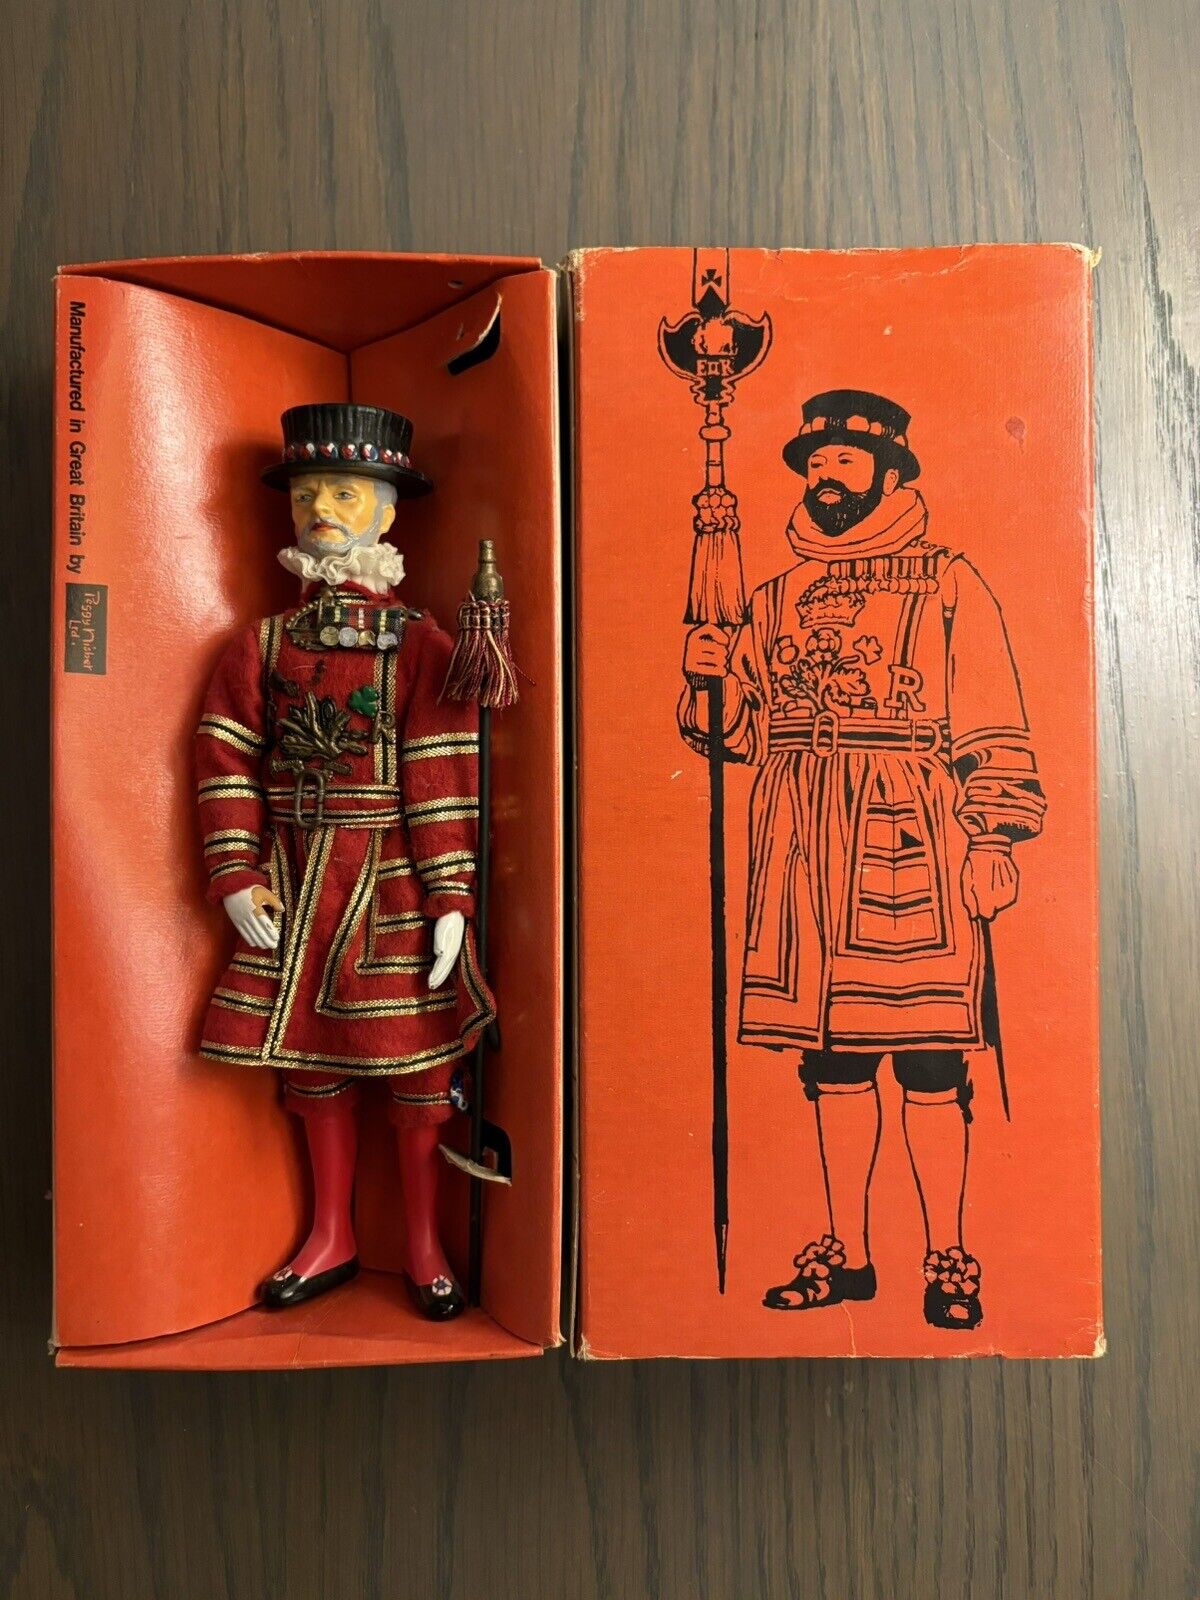 Vintage Yeoman Warder HM Tower of London by Peggy Nisbet - Watchman Guard